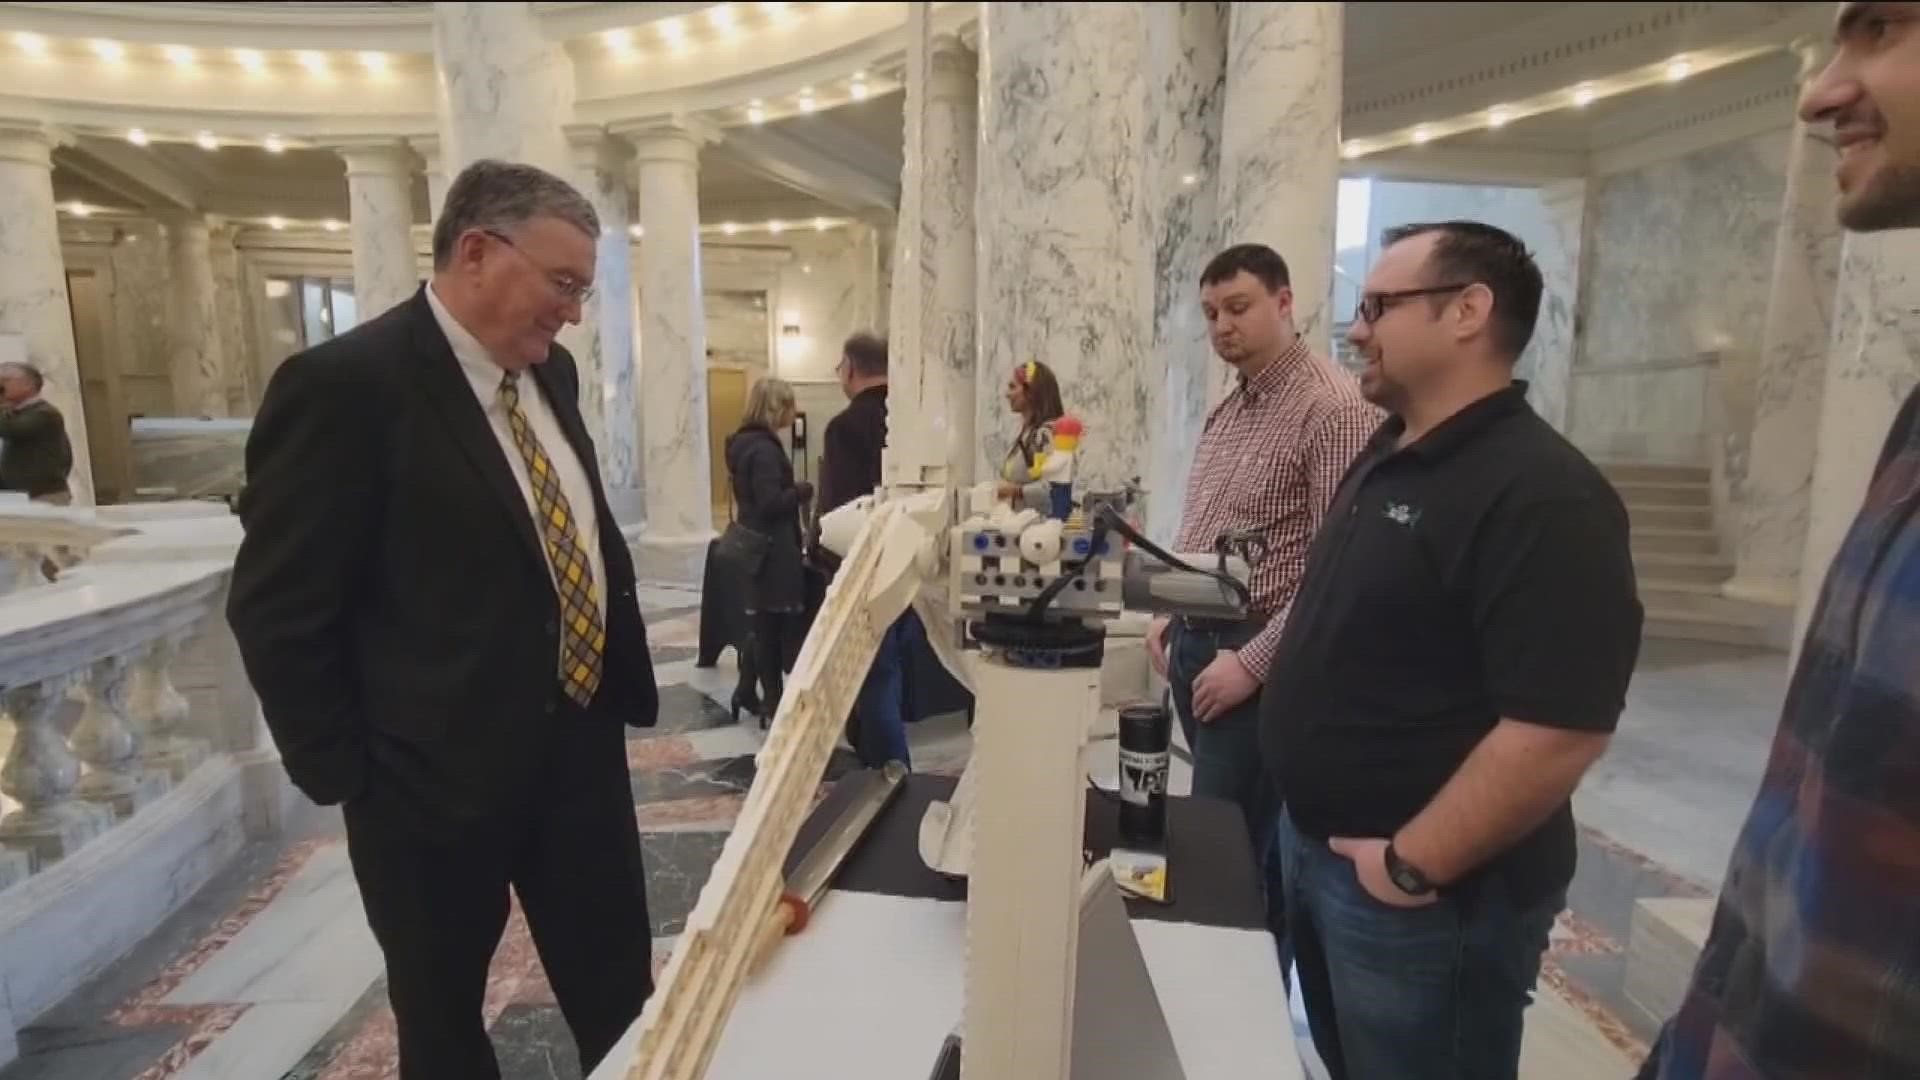 Idaho Energy Freedom hosted its inaugural education day Wednesday for lawmakers and visitors to the Idaho State Capitol.